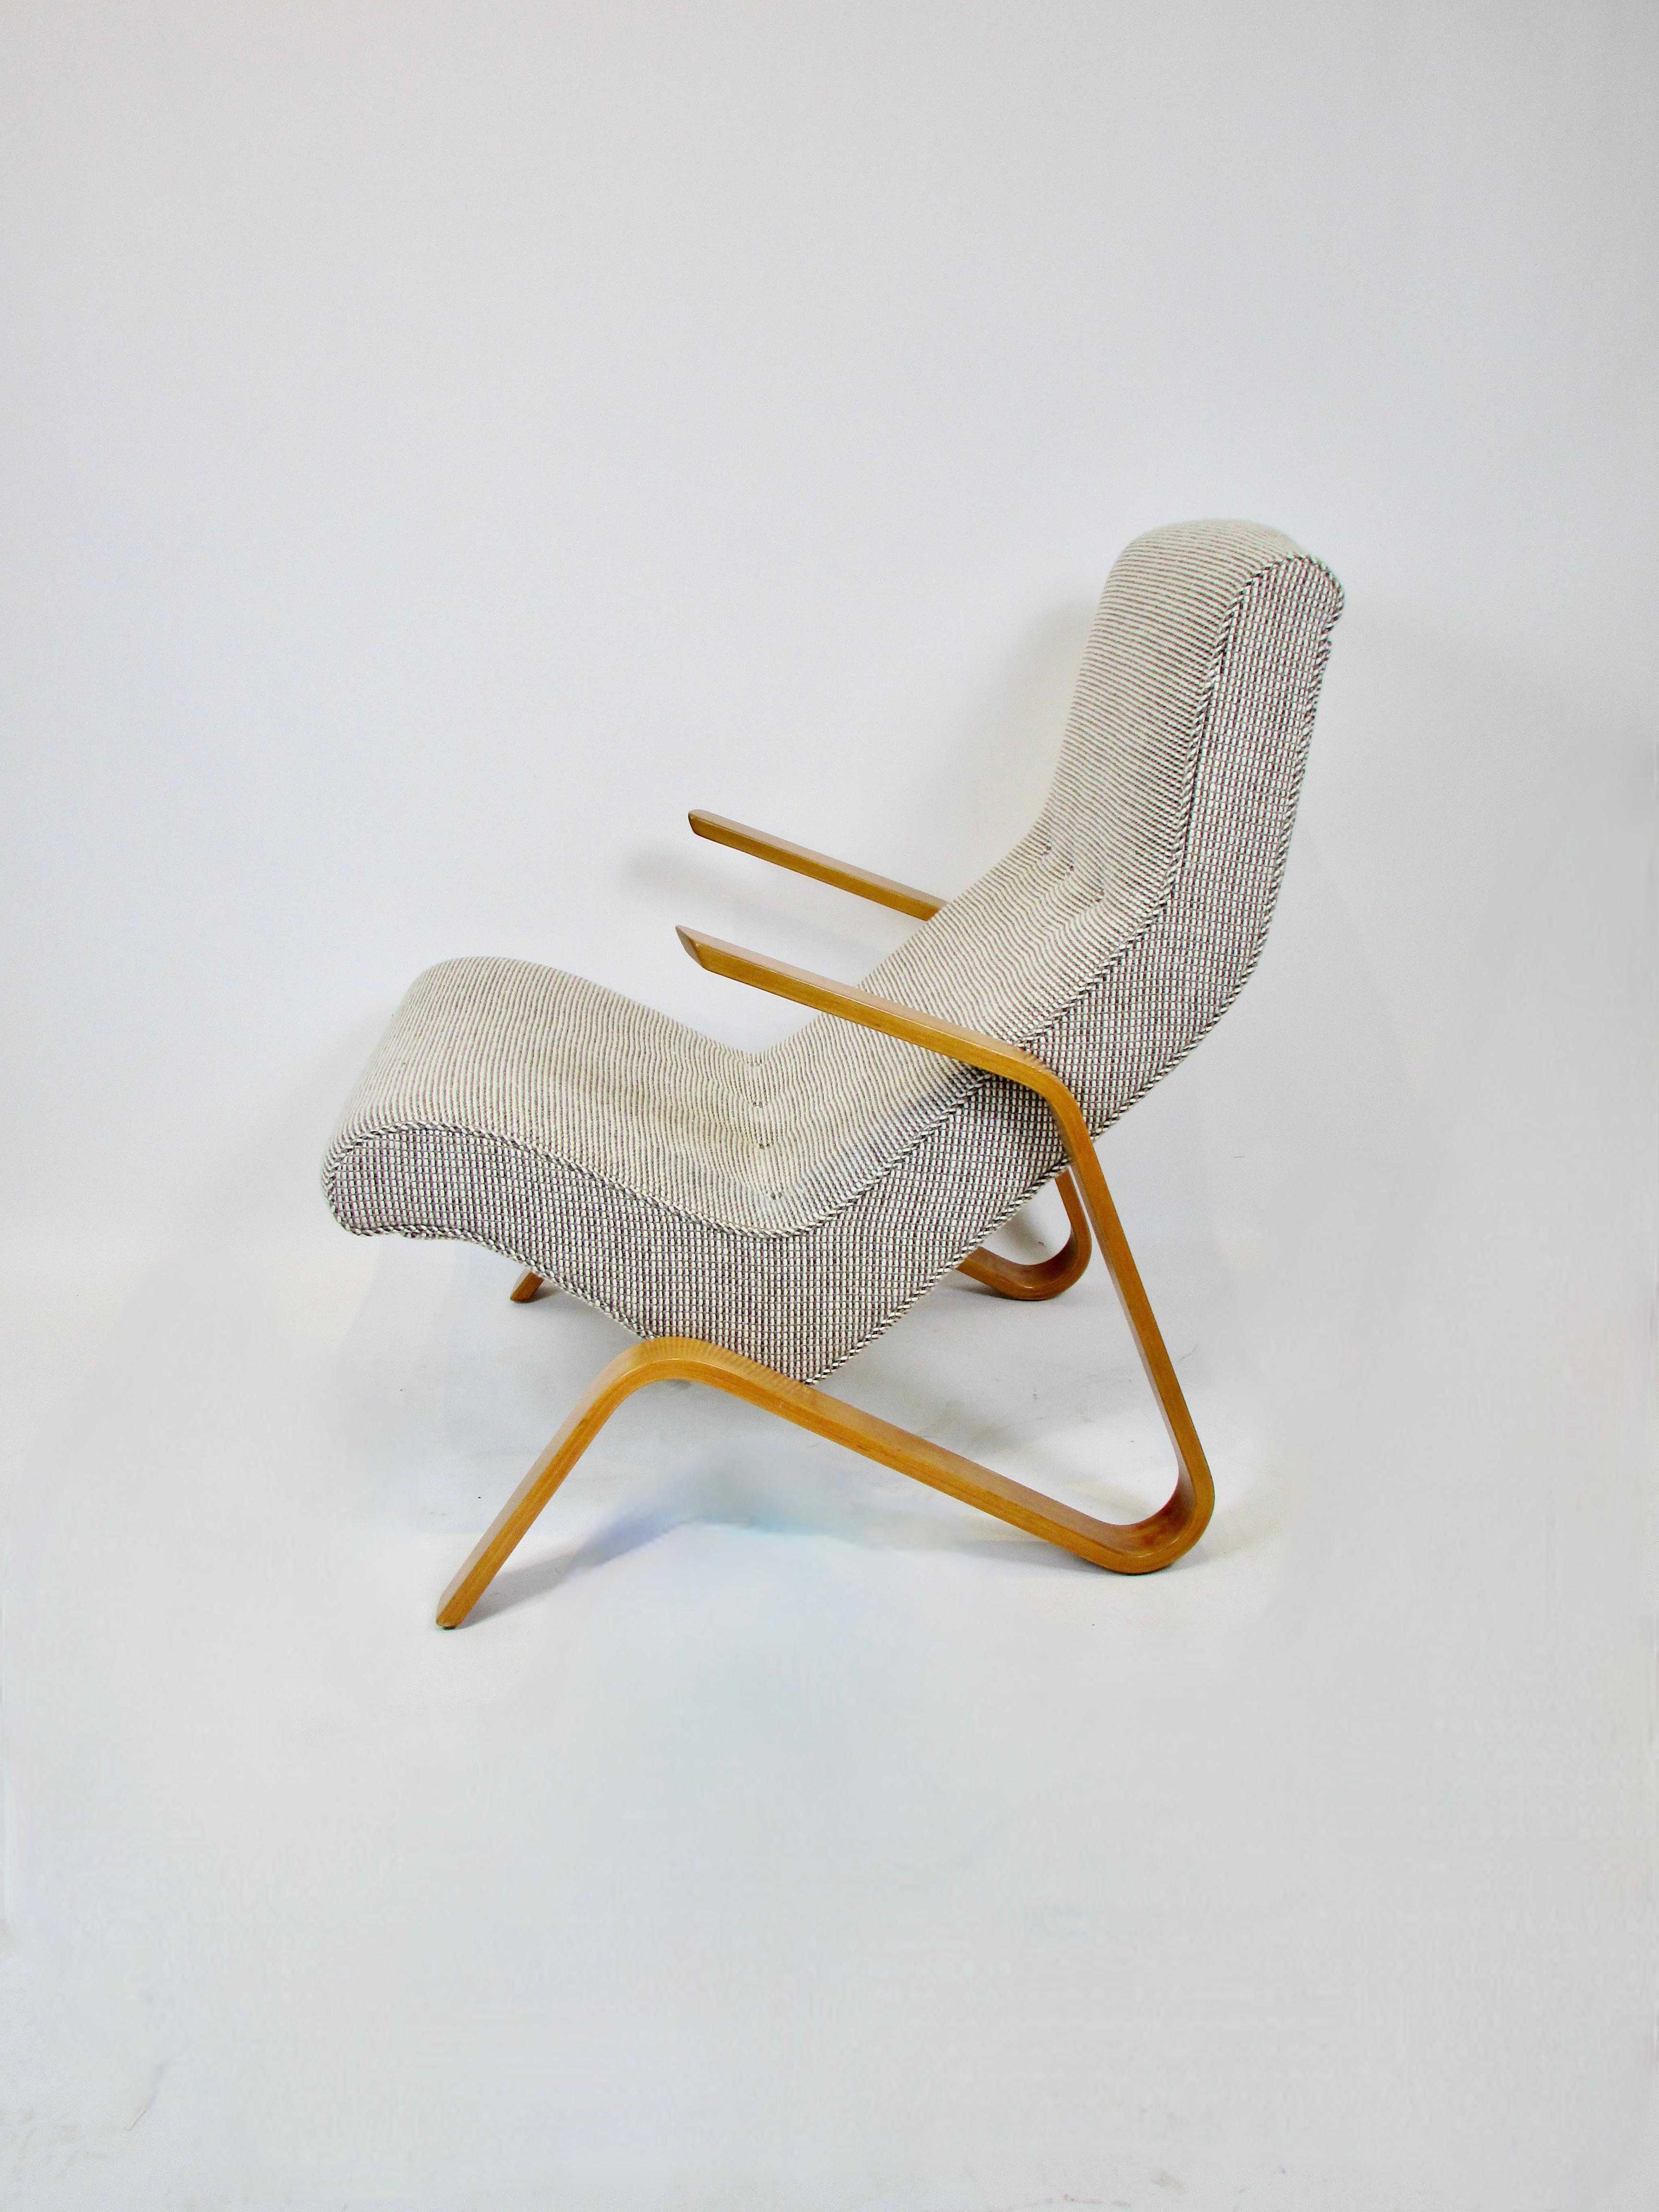 20th Century Properly Restored Early Production Eero Saarinen Grasshopper Chair for Knoll For Sale